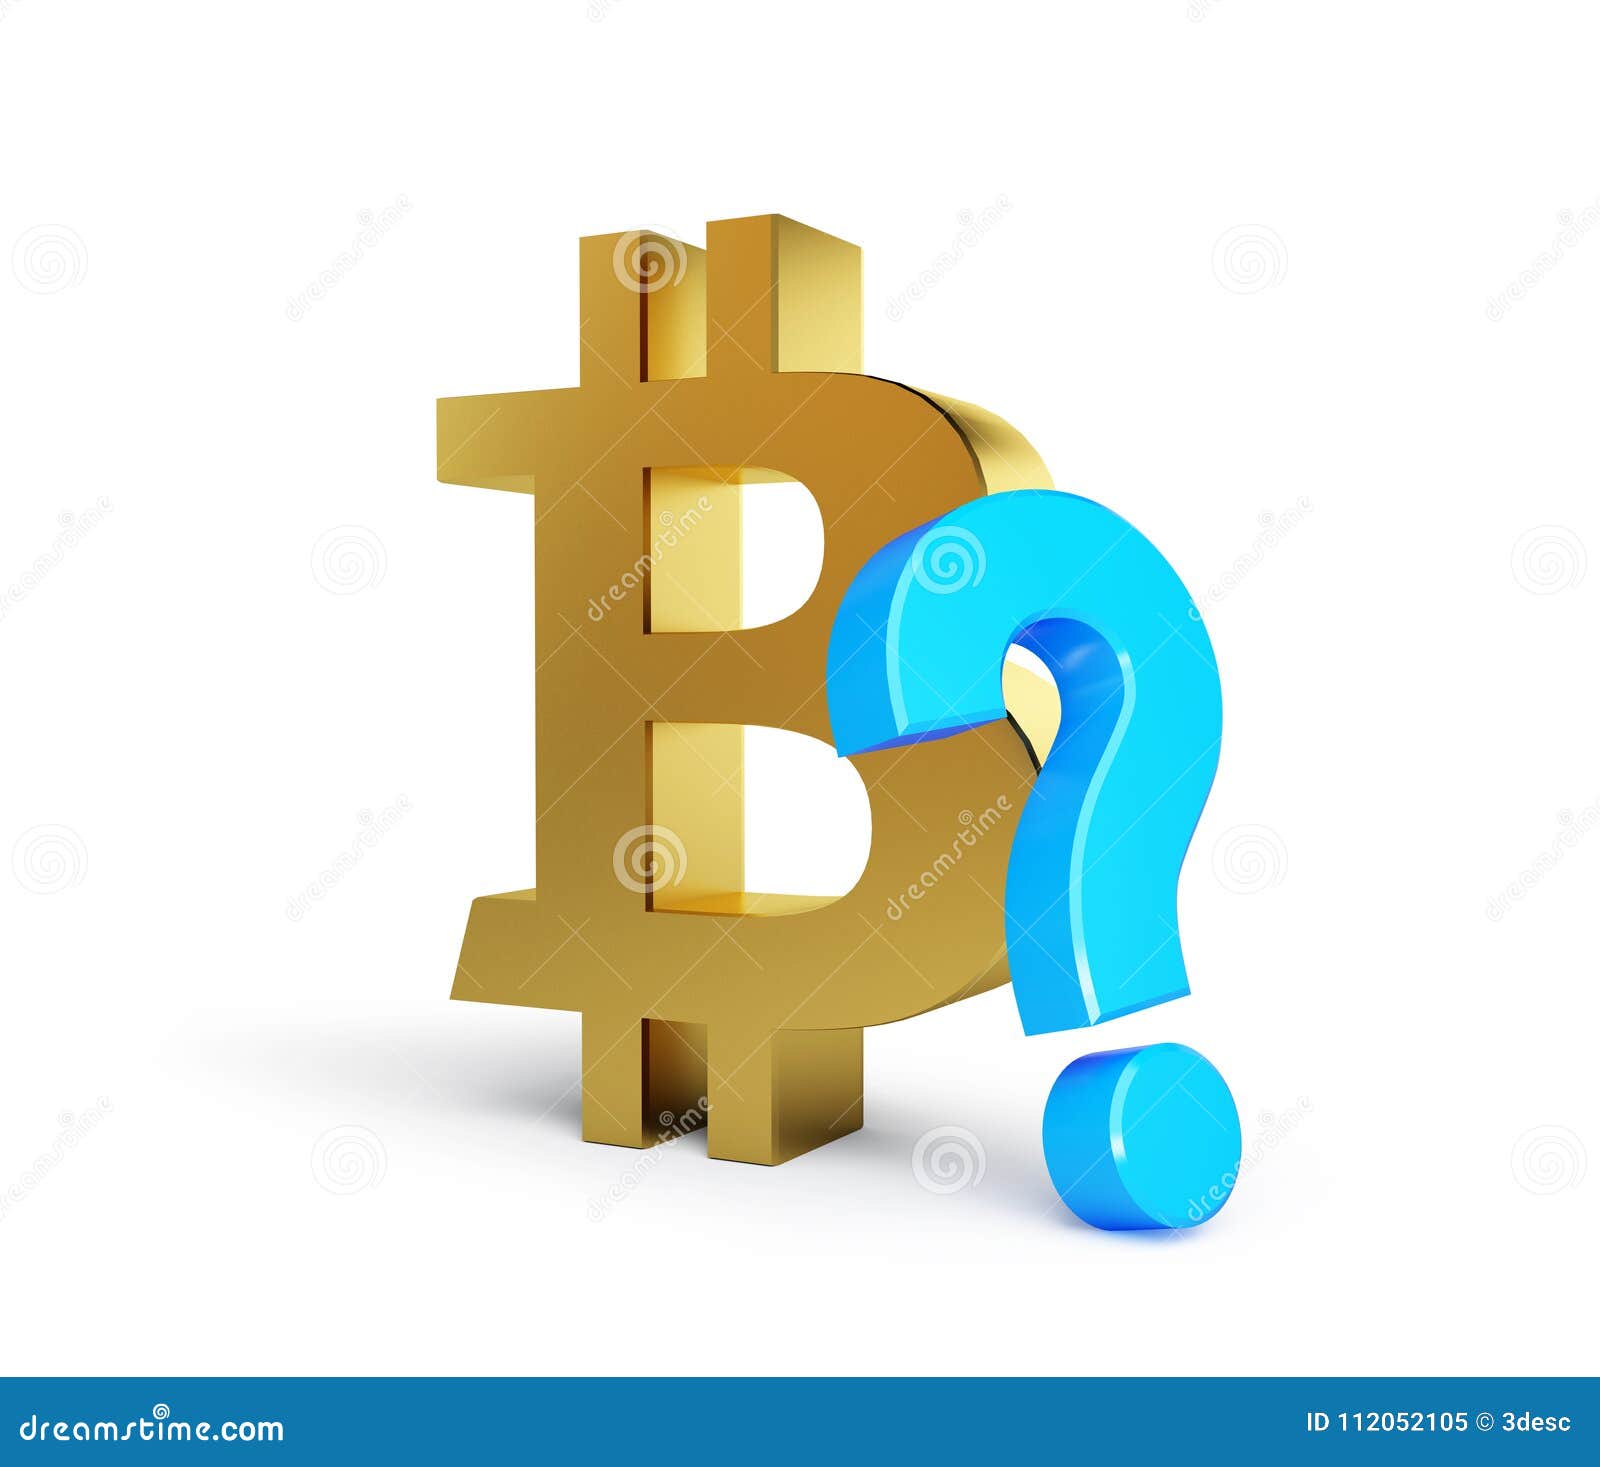 questions on bitcoins